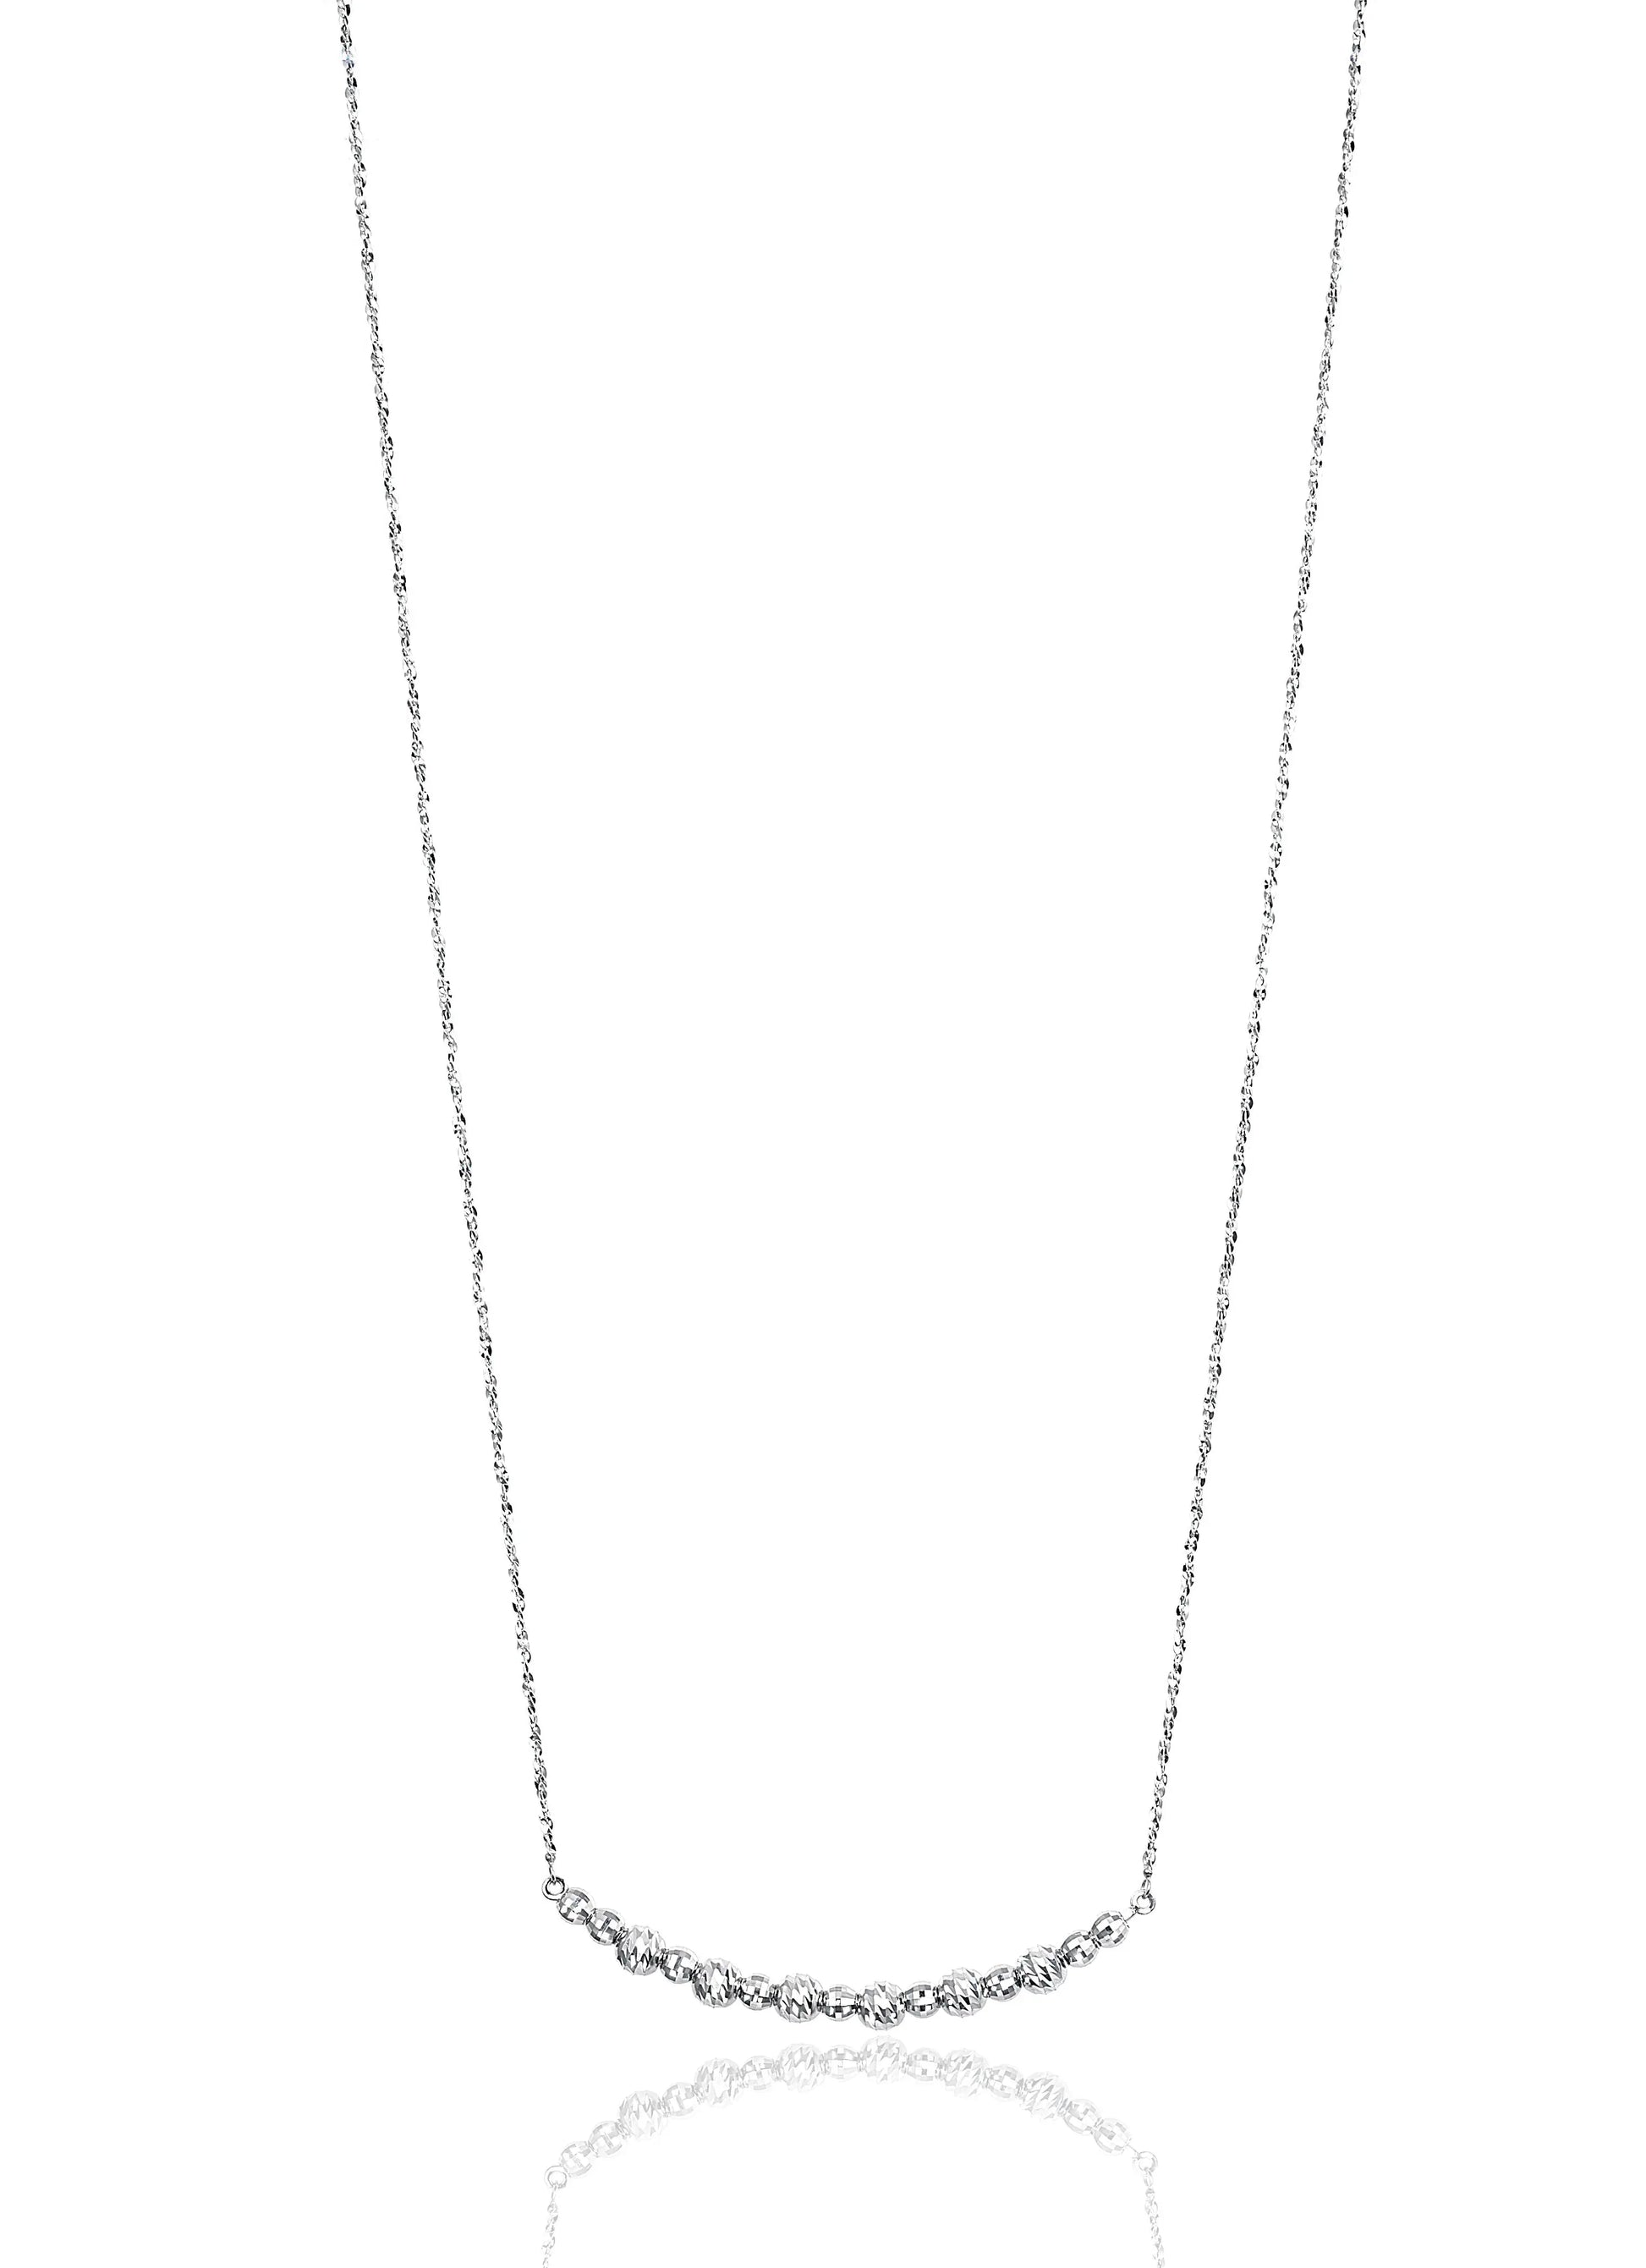 The ultimate timeless classic, Lisette features graduated, brilliant-cut beads threaded by hand into a smile ornament in the center. Held by a delicate, adjustable chain, the Lisette can be lengthened or shortened to wear as a necklace or choker. Designed by Platinum Born